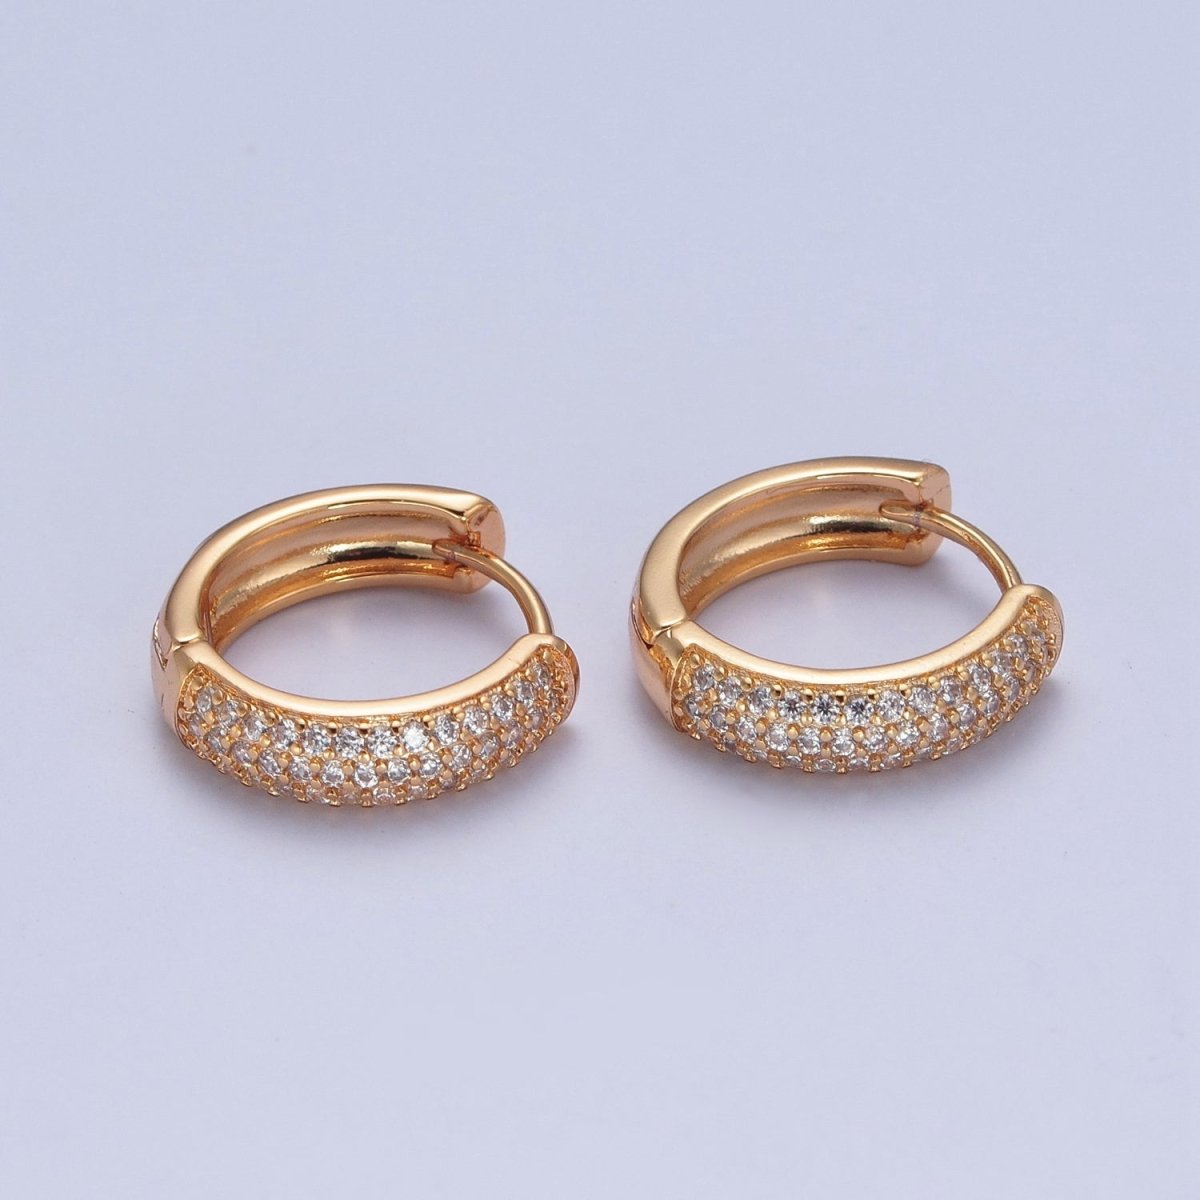 Minimalist 24K Gold Filled Micro Pave Clear Cubic Zirconia 14x15mm Huggie Hoops Earrings P-406 - DLUXCA